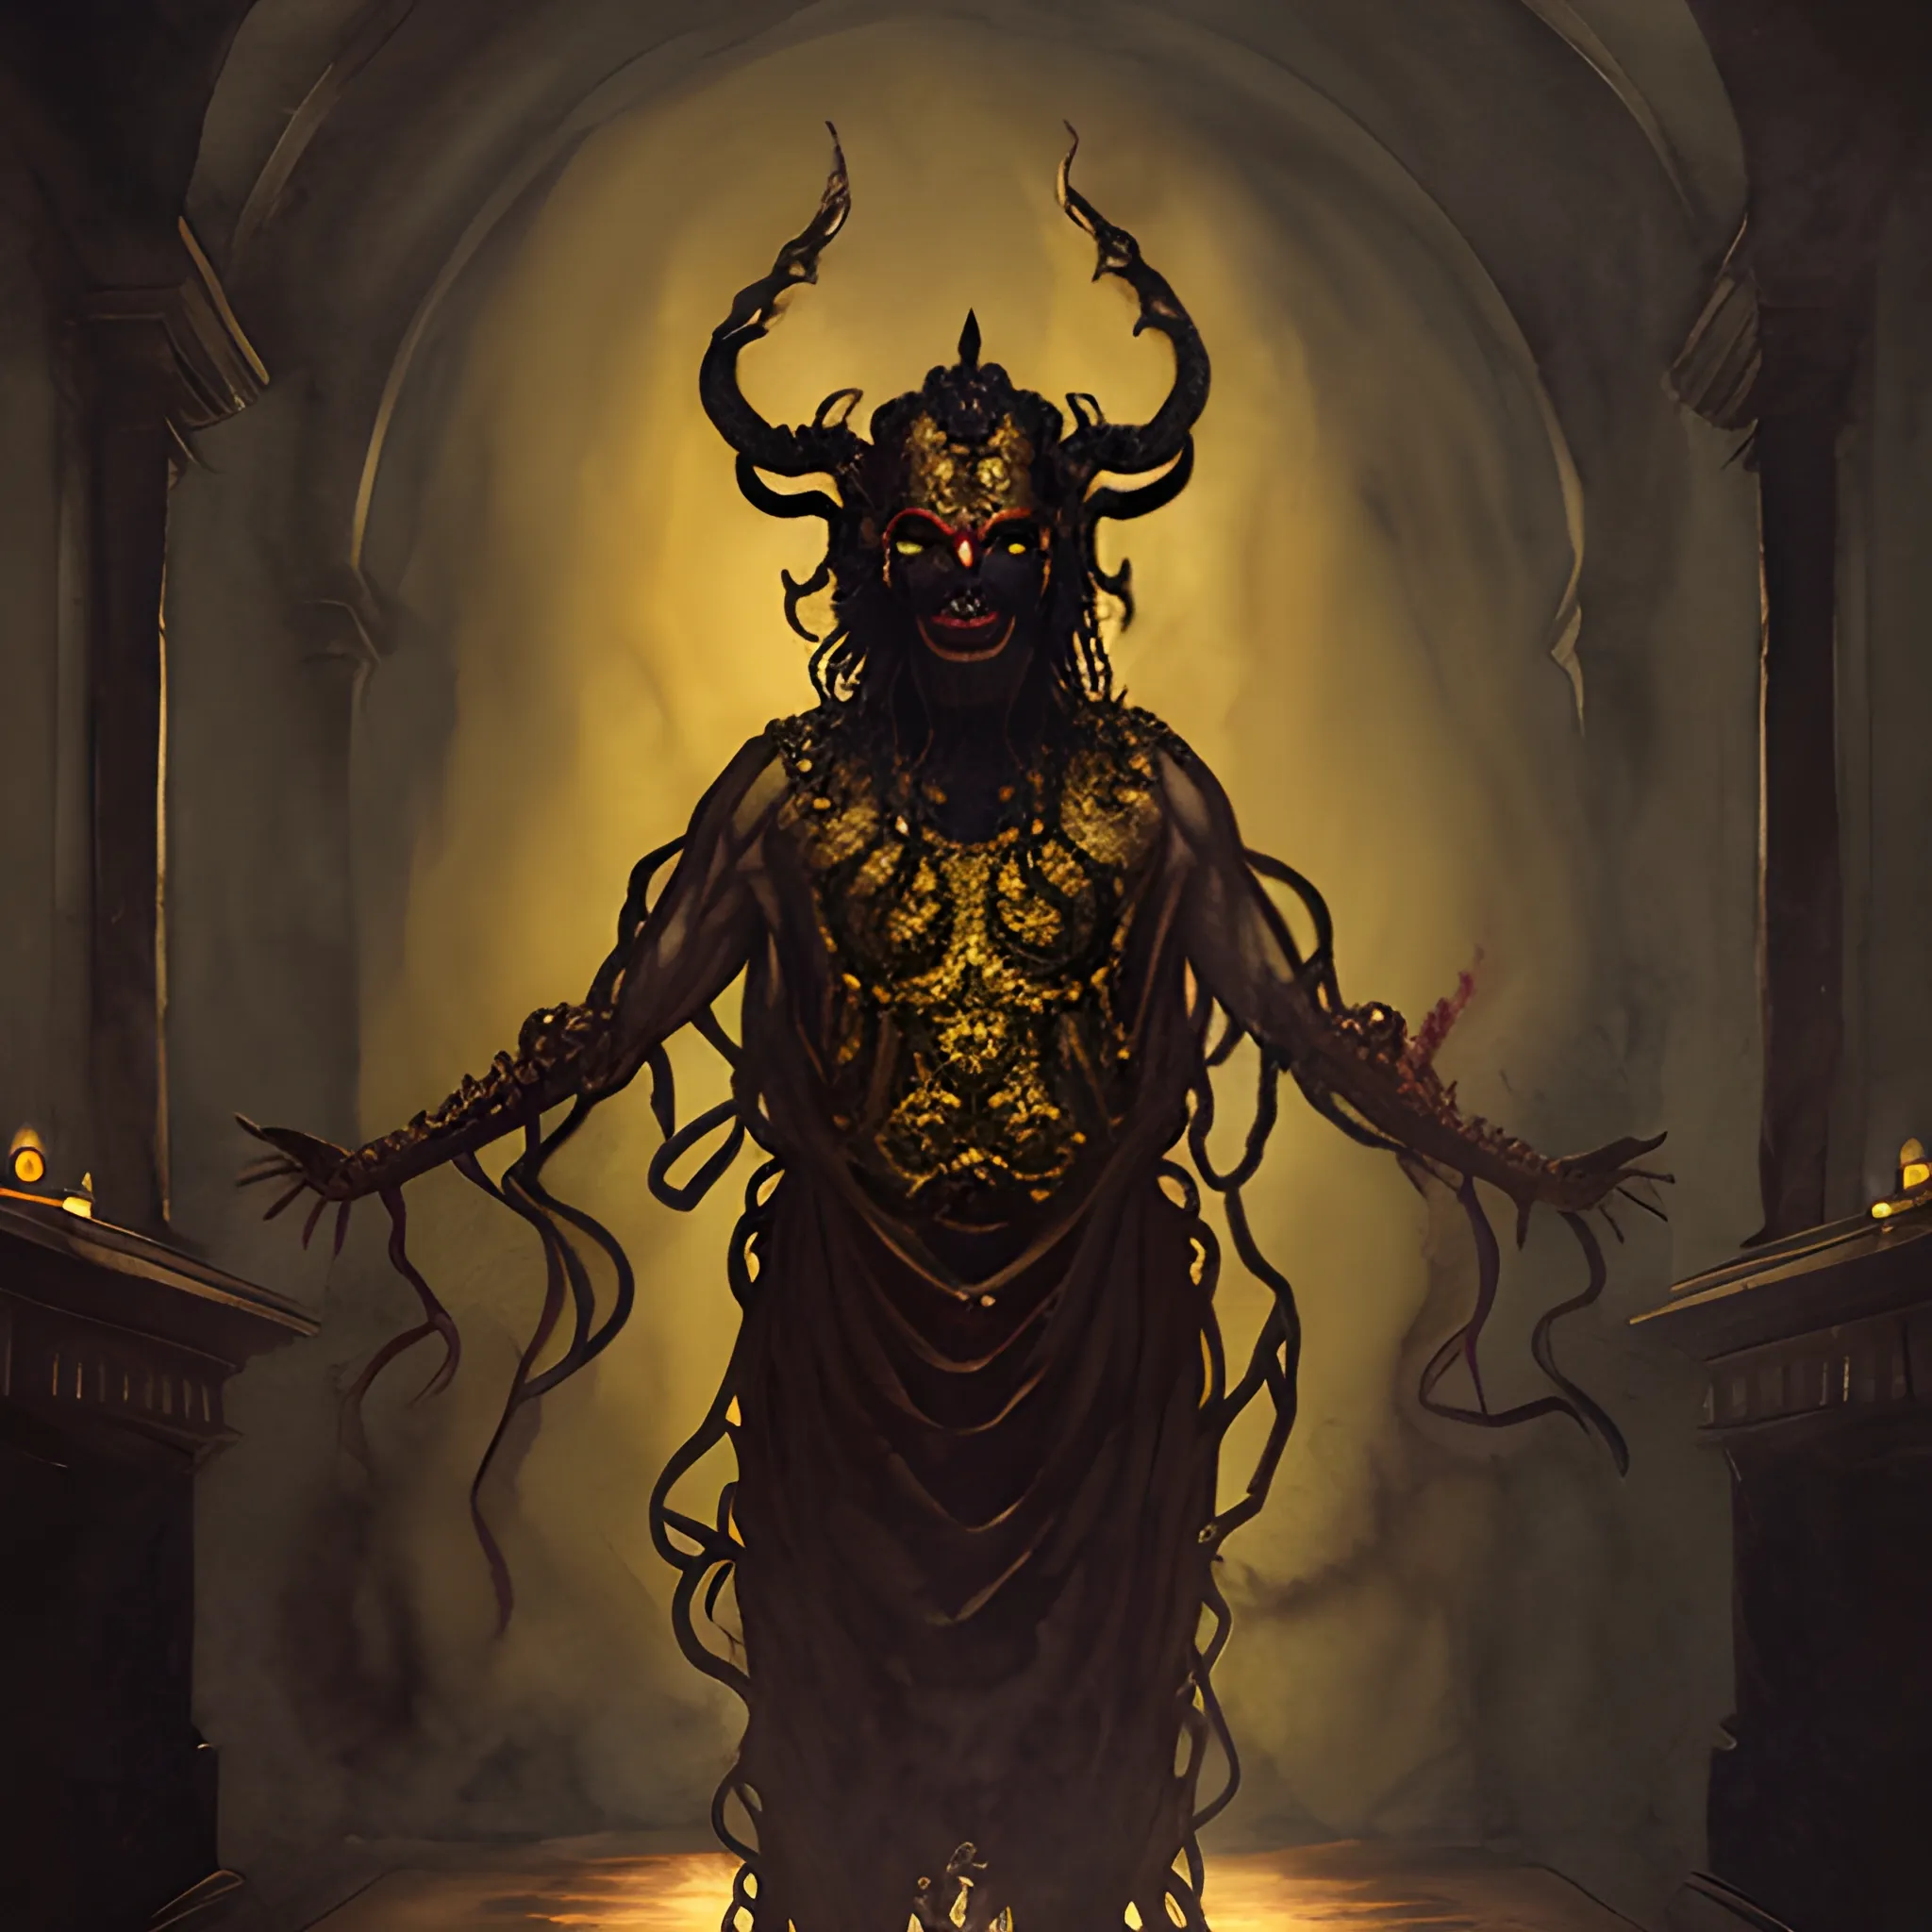 wide shot of faceless male demon with eight arms and a golden head-dress, in a dark hall, Water Color

